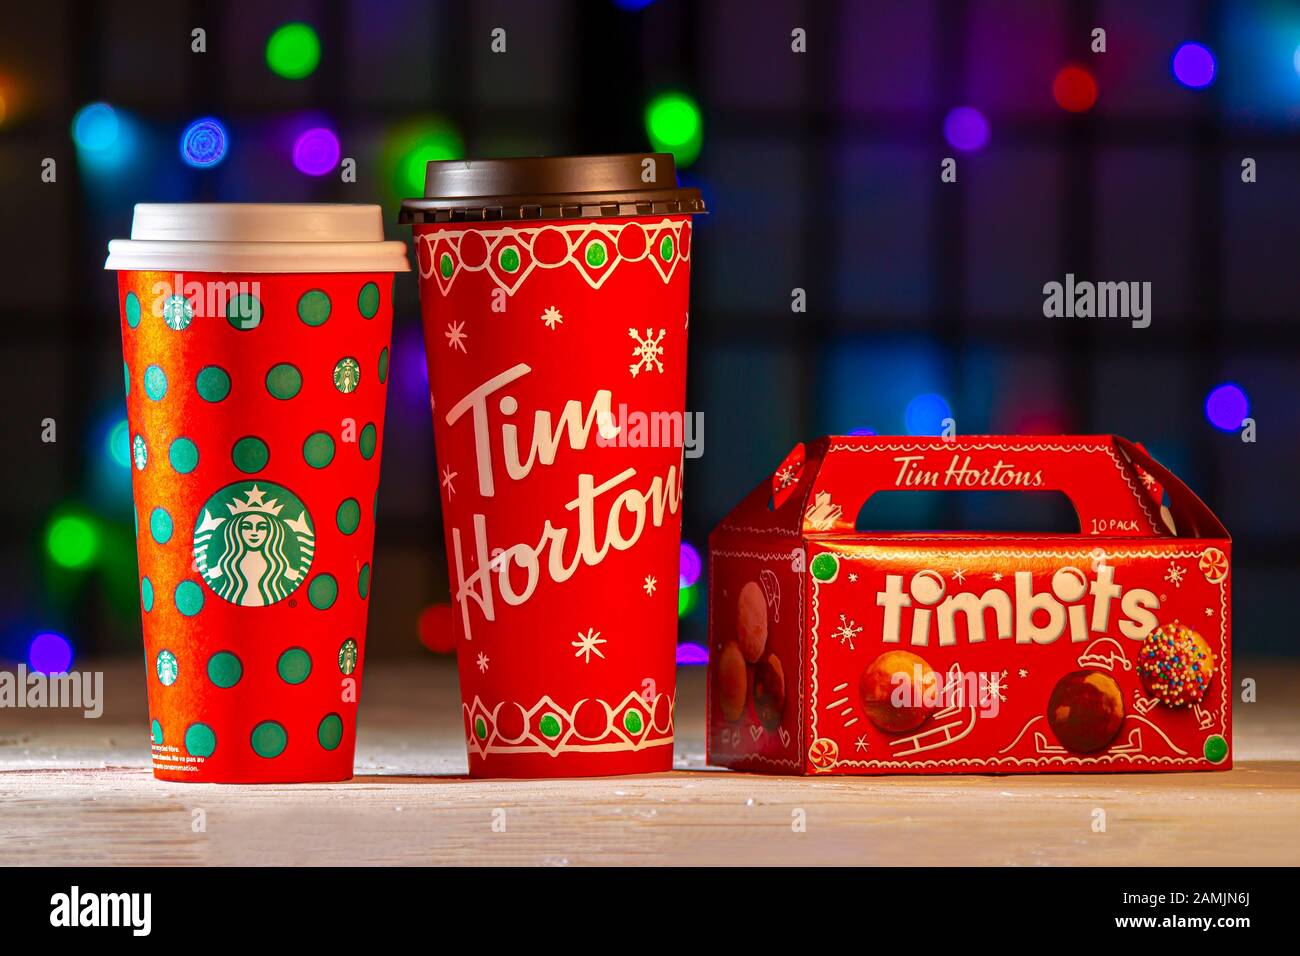 Calgary, Alberta, Canada. Jan 13, 2020. Christmas Starbucks and Tim Hortons coffee cups with some bite-sized fried-dough box with Christmas lights on Stock Photo